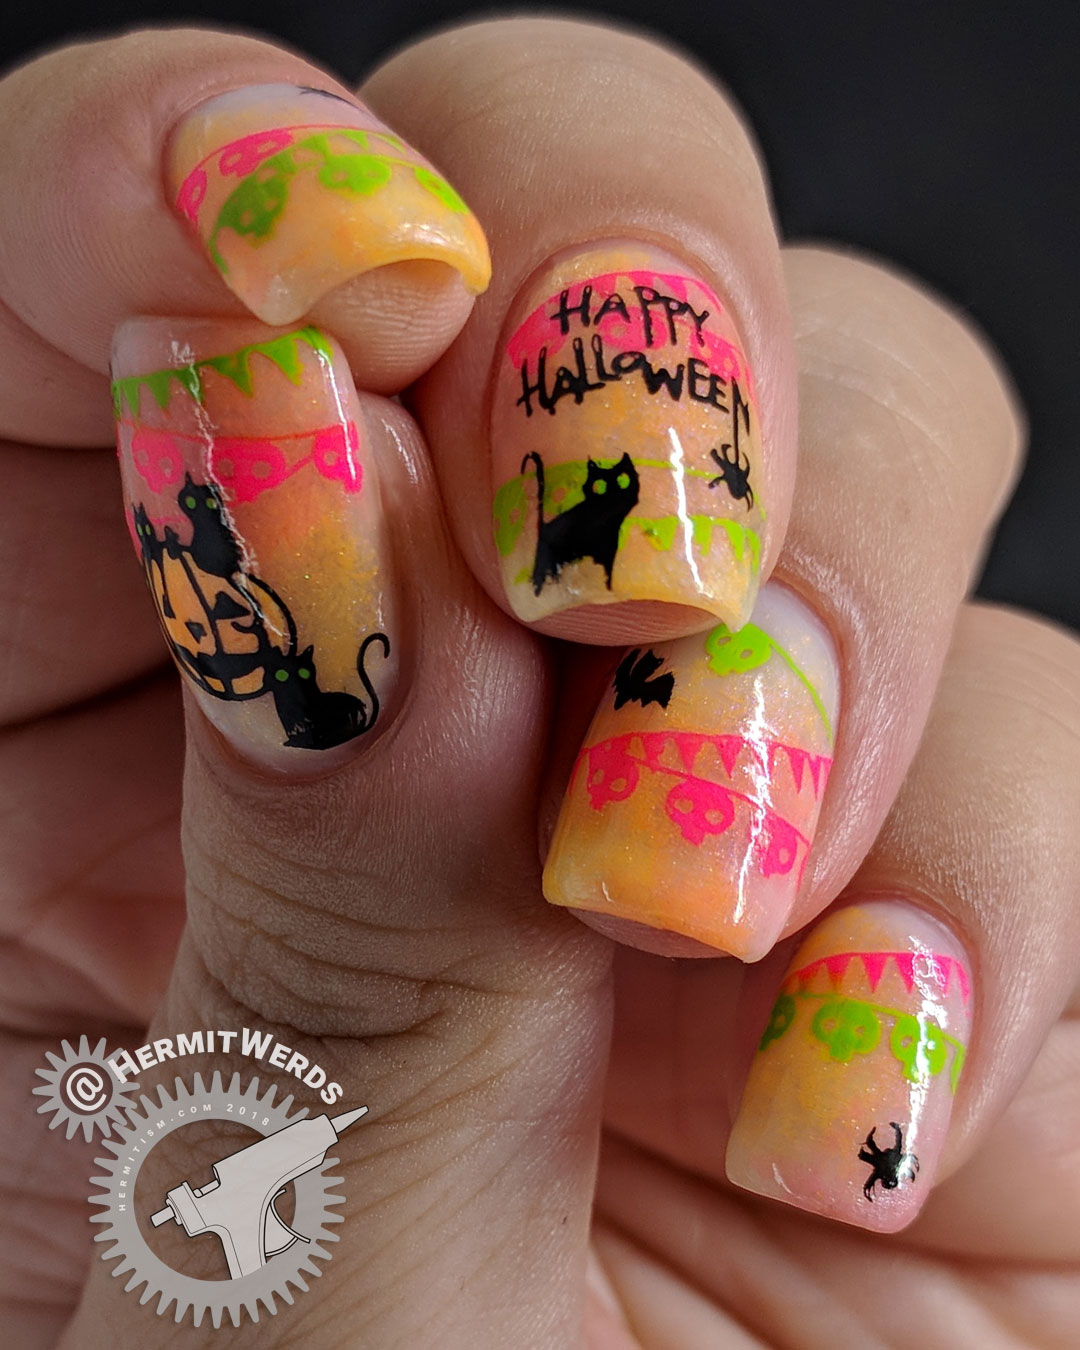 Halloween Cat Posse - Hermit Werds - neon pink and green banners behind spiders, bats, and a posse of black cats with a pumpkin